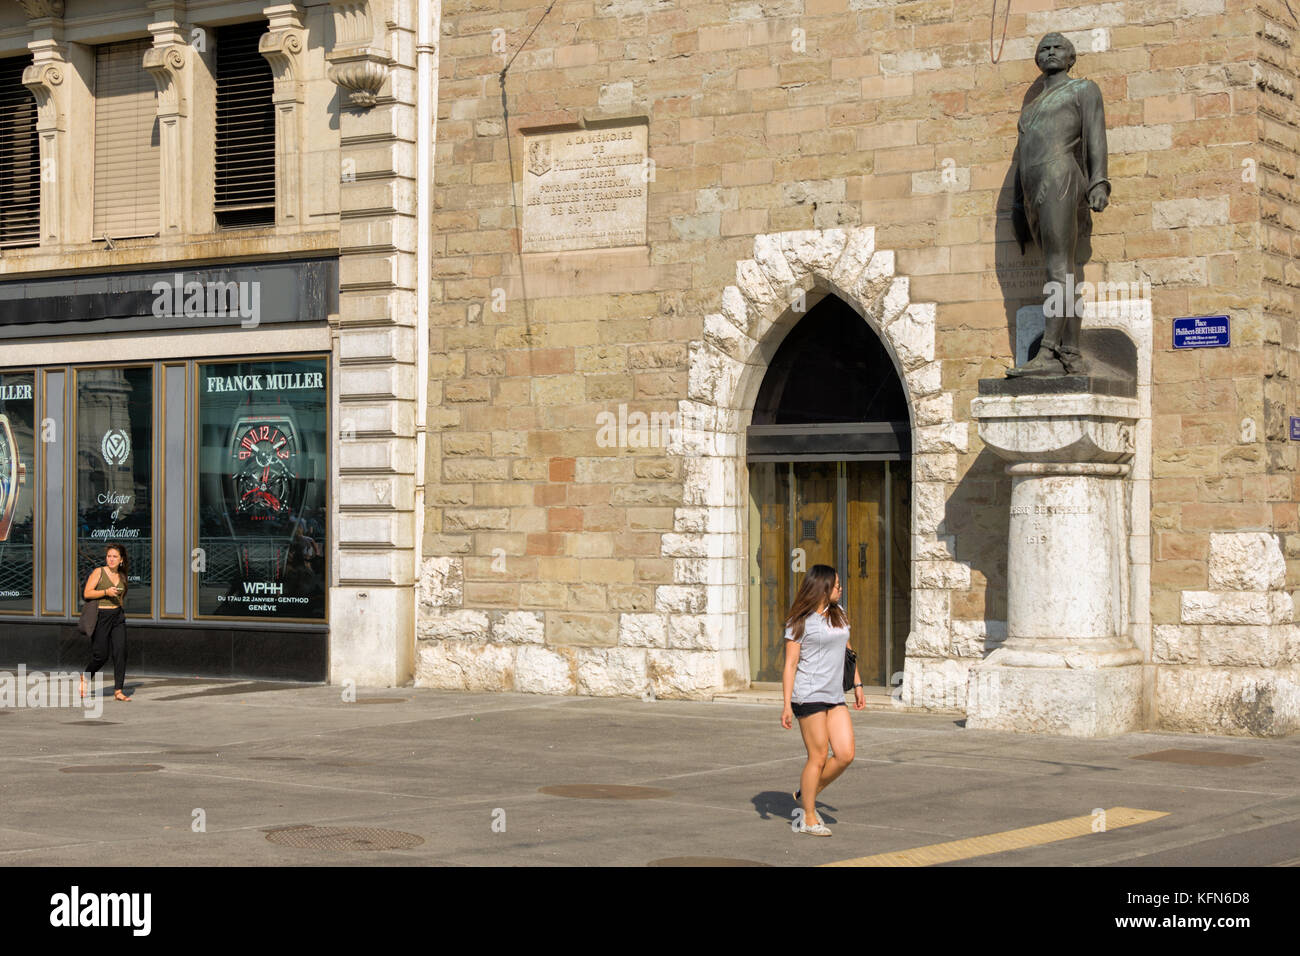 GENEVA, SWITZERLAND - AUGUST 29. Square Belair, the tower has become one of the key monuments of the city's heritage Stock Photo